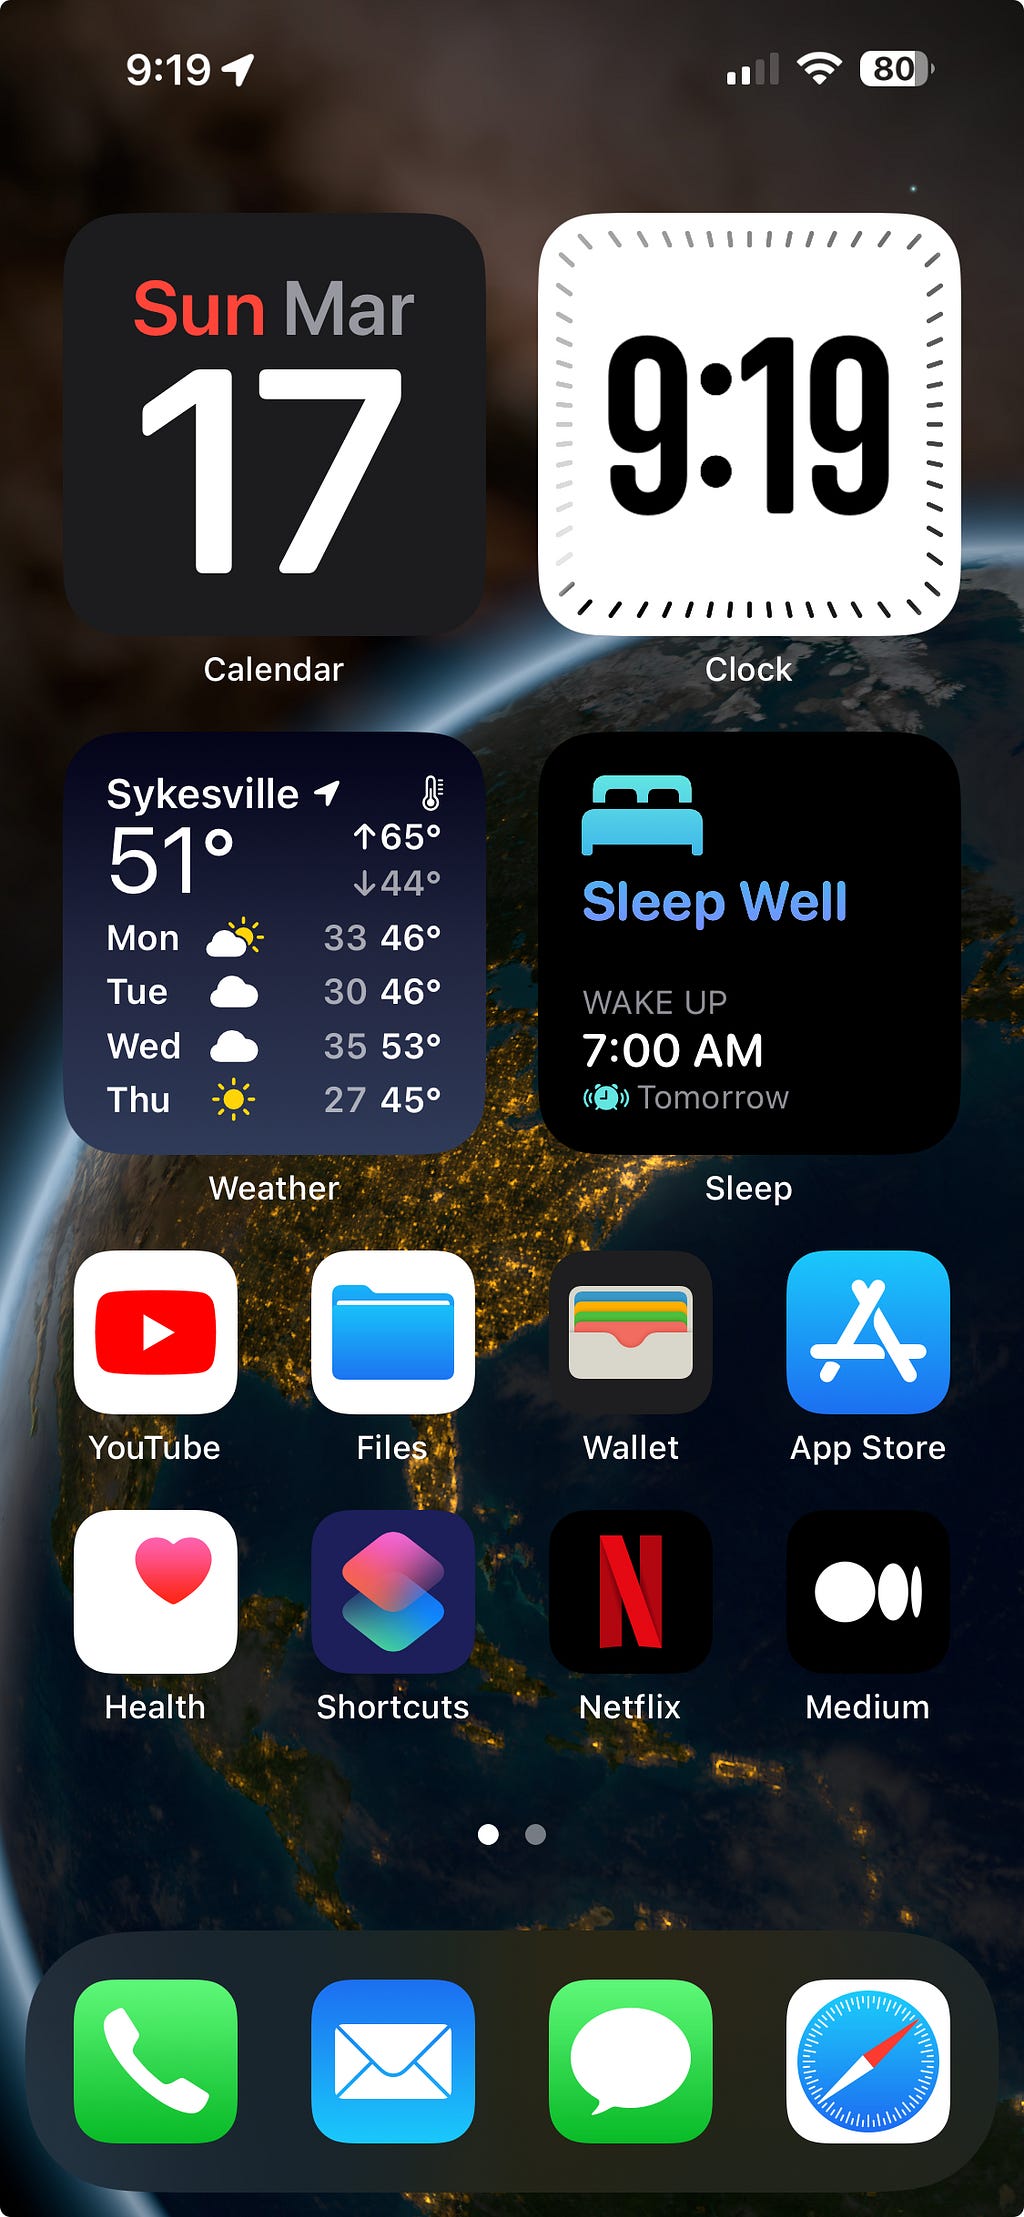 iPhone home screen with smart stack widget and Siri app suggestions displayed.